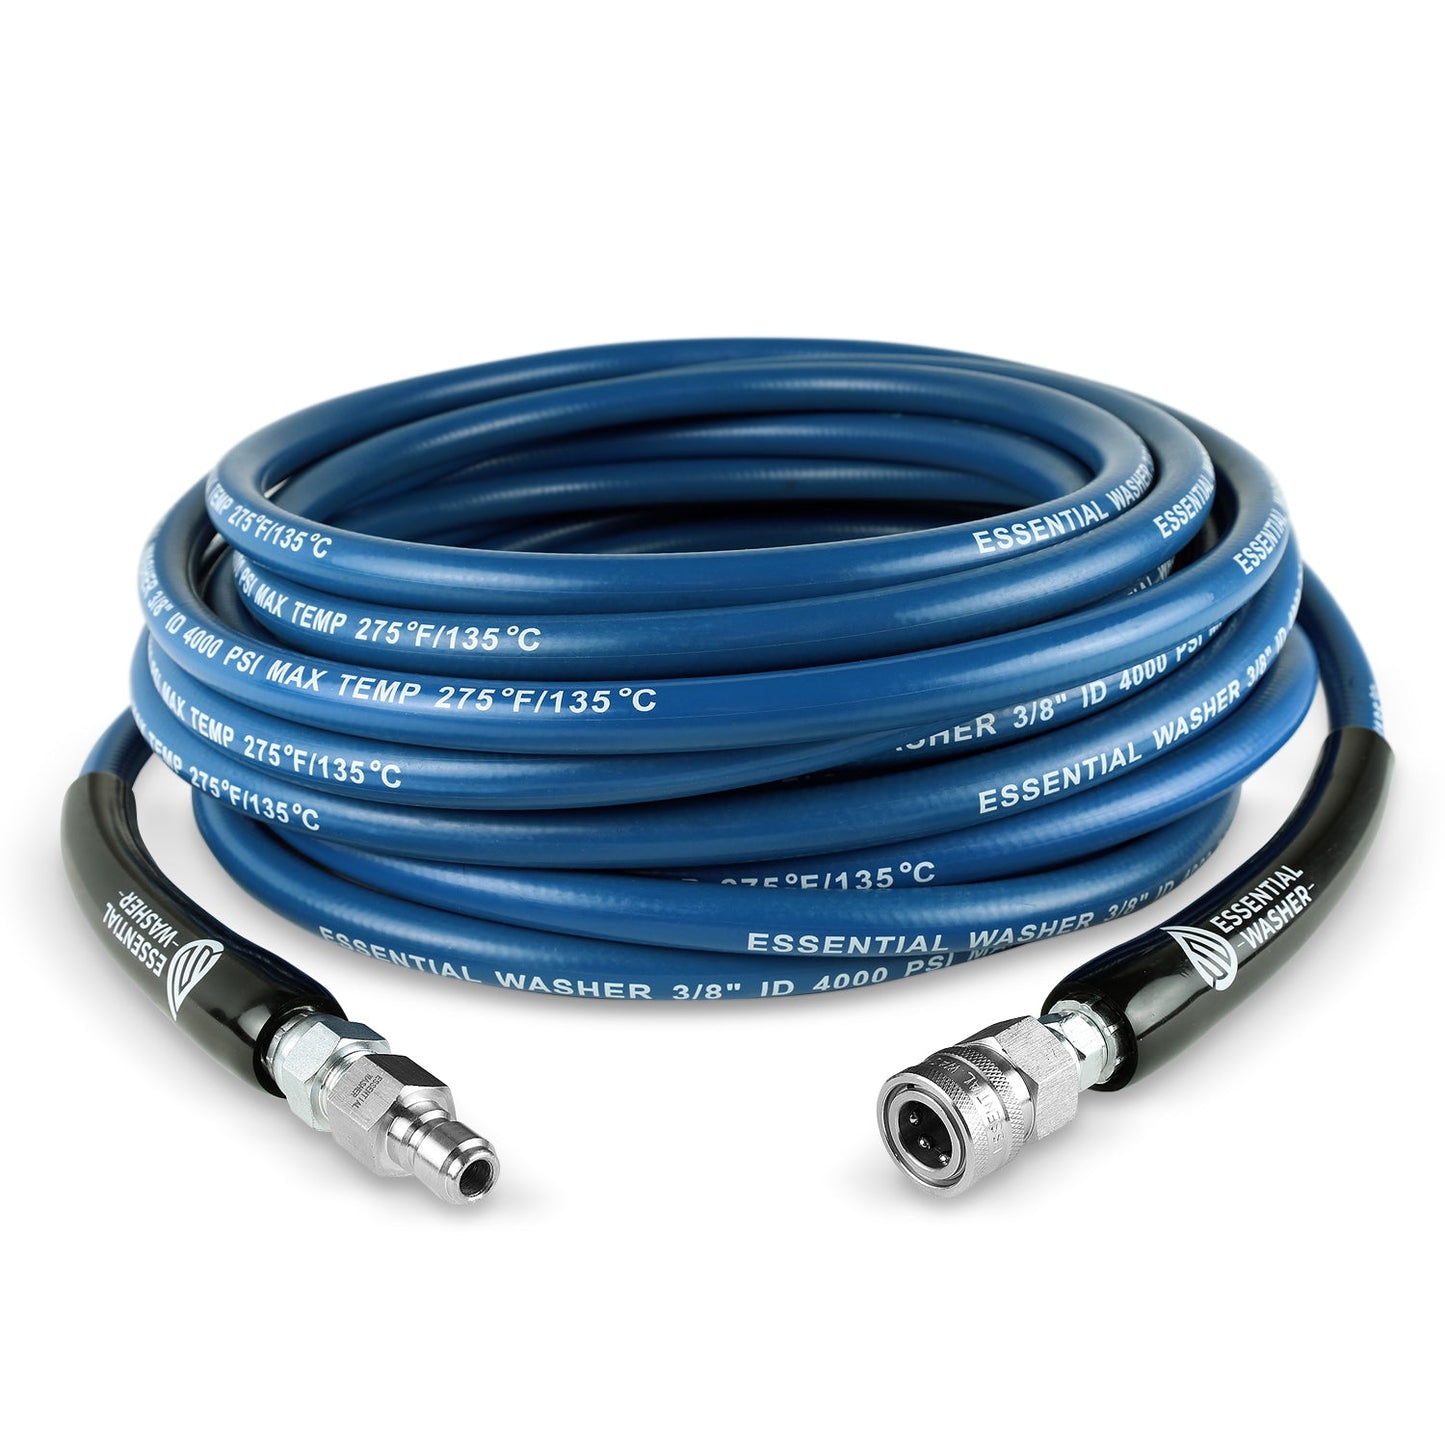 50 FT Blue Pressure Washer Hose | 3/8" Flexibility With Stainless Steel Fittings